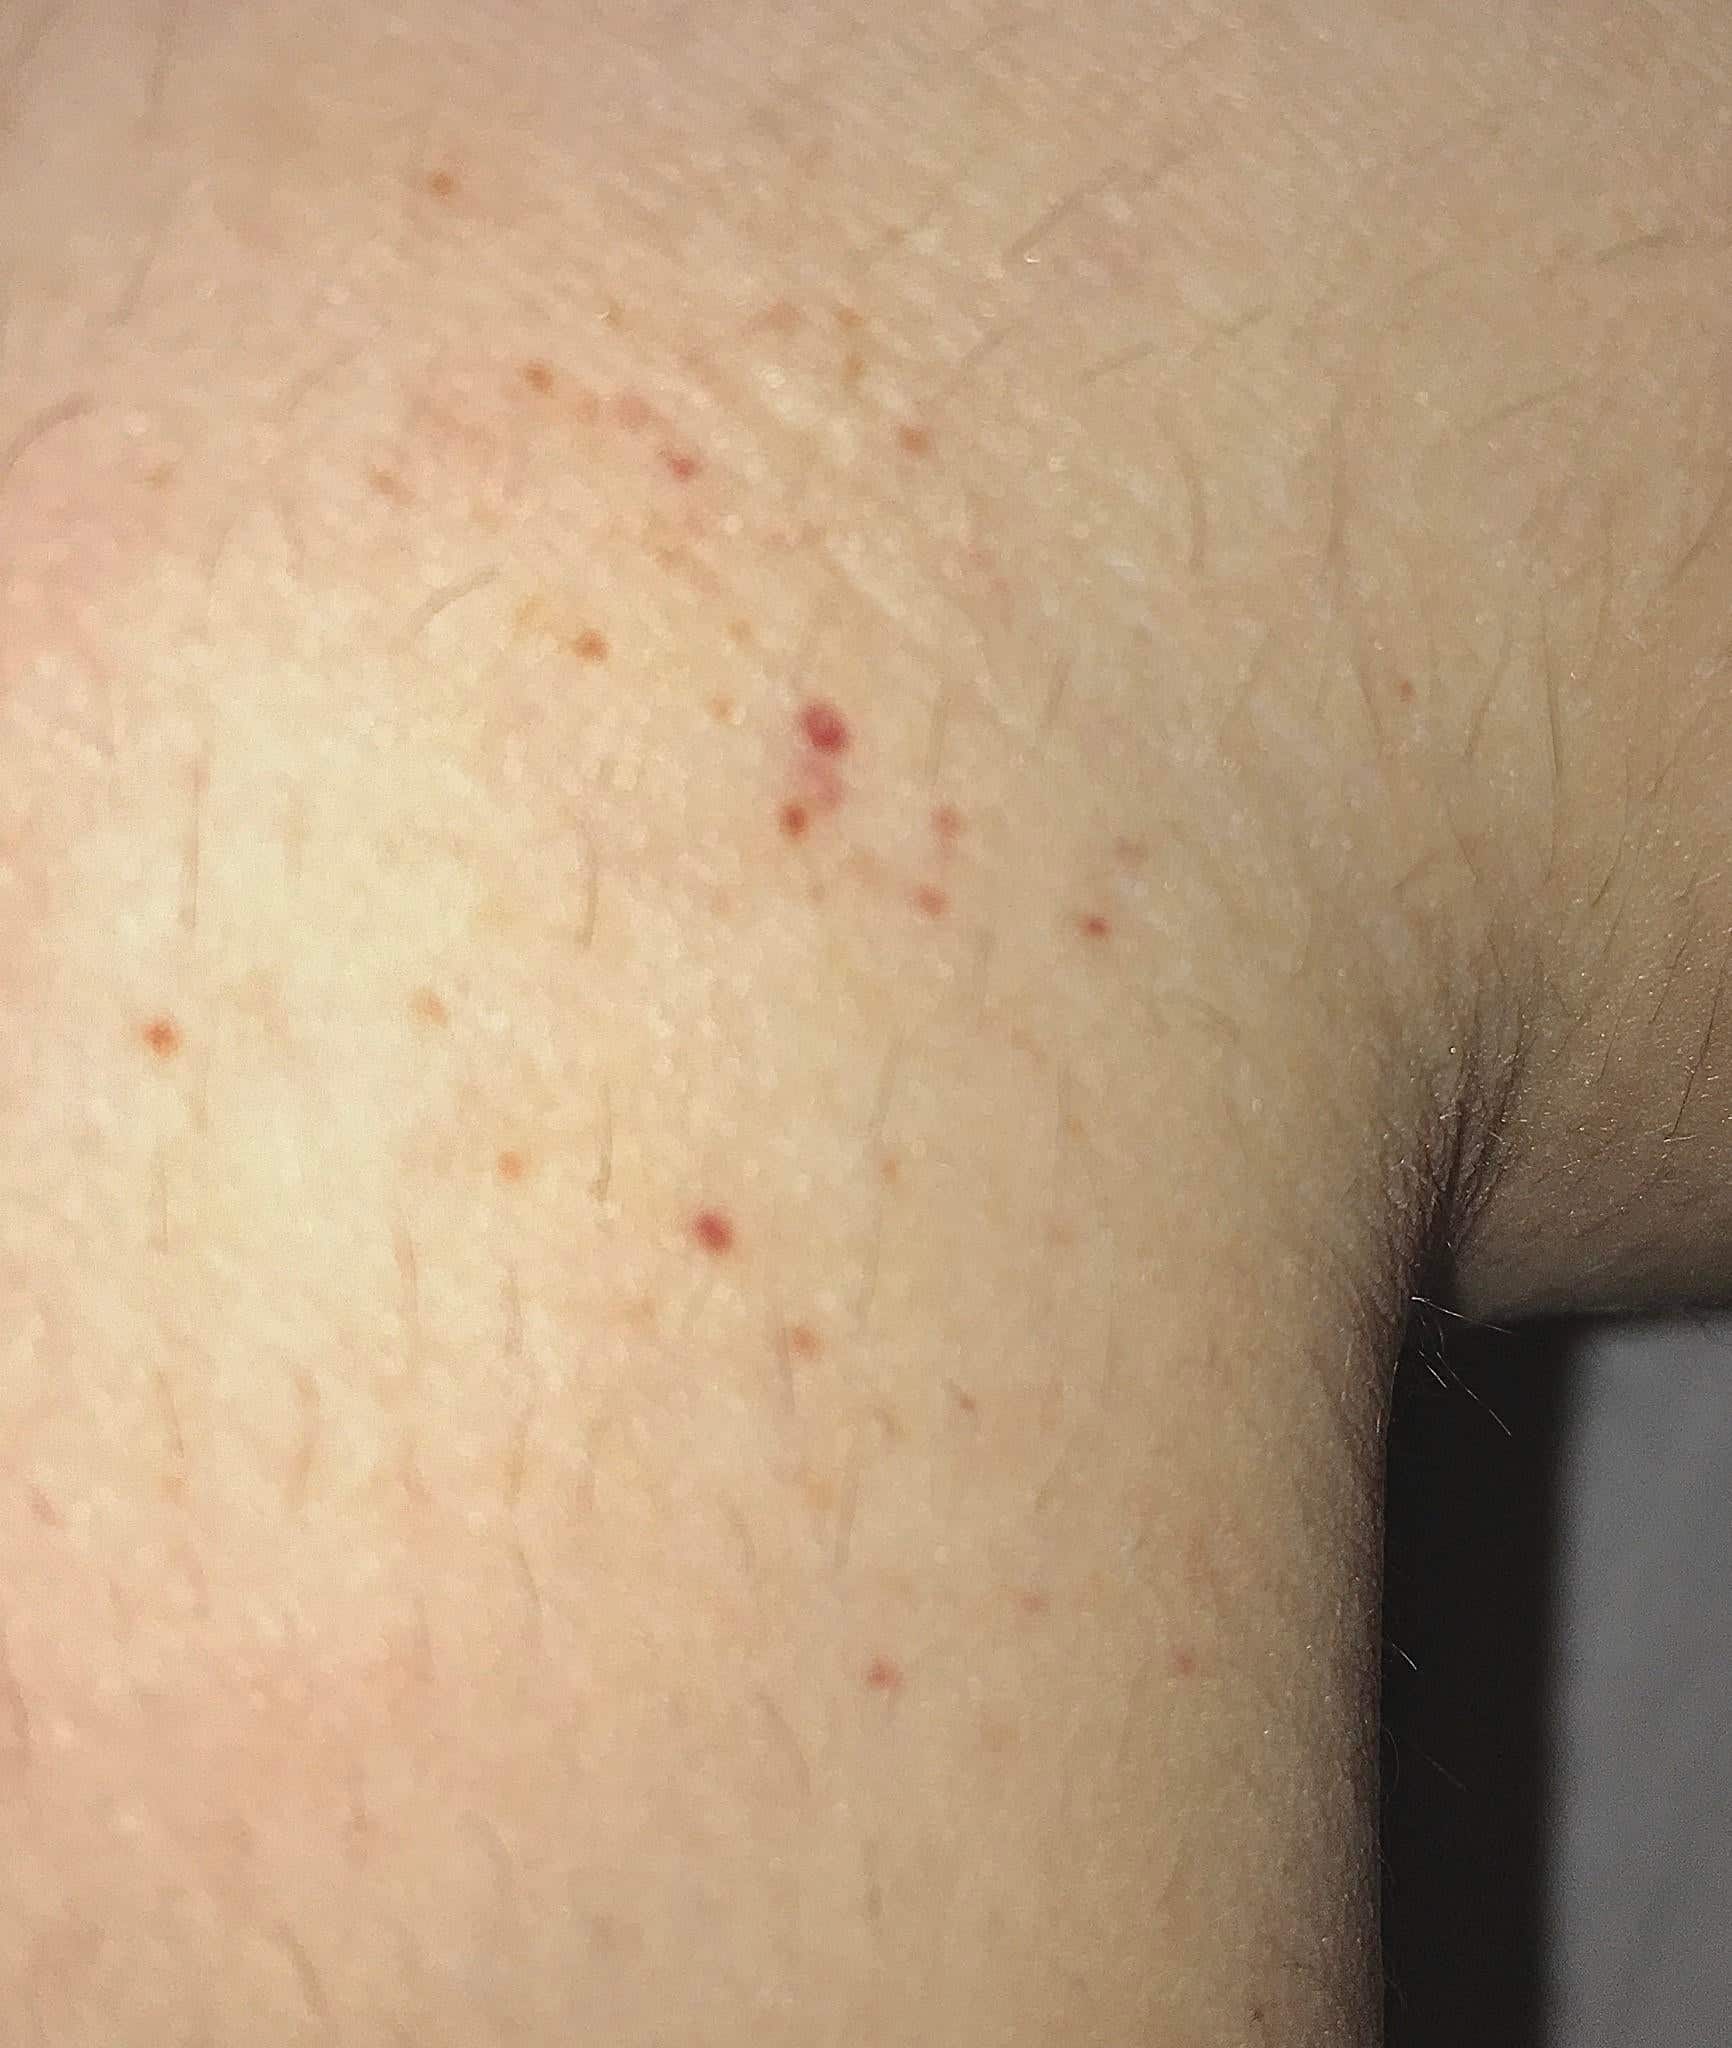 Found this little red dots all over my legs and feet, they are plain ...